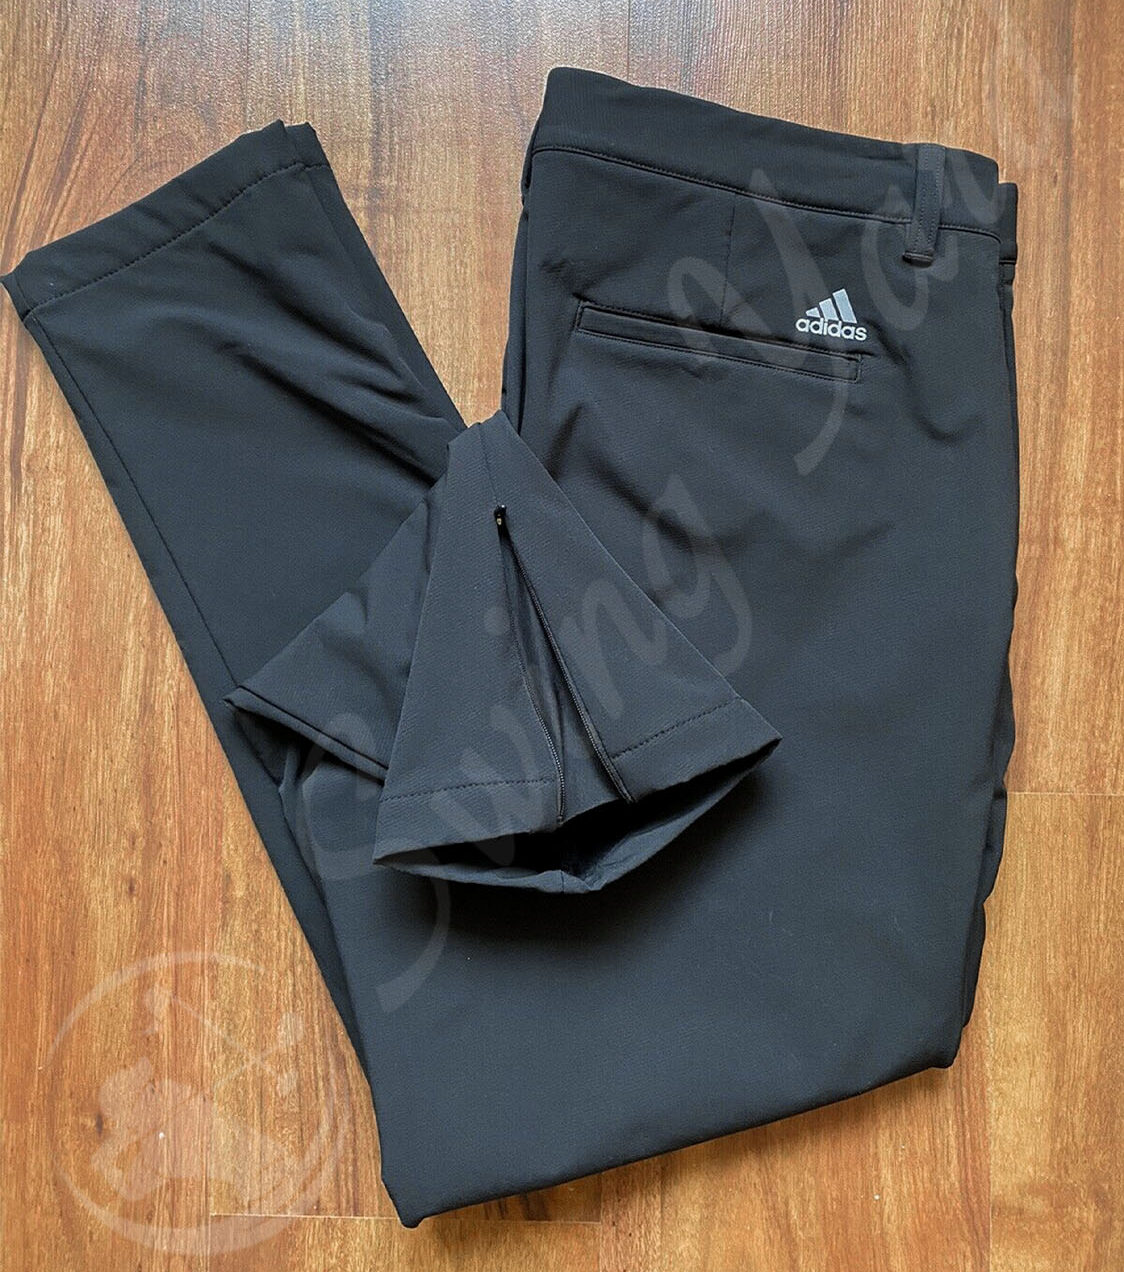 adidas Frostguard Insulated Pants - Black